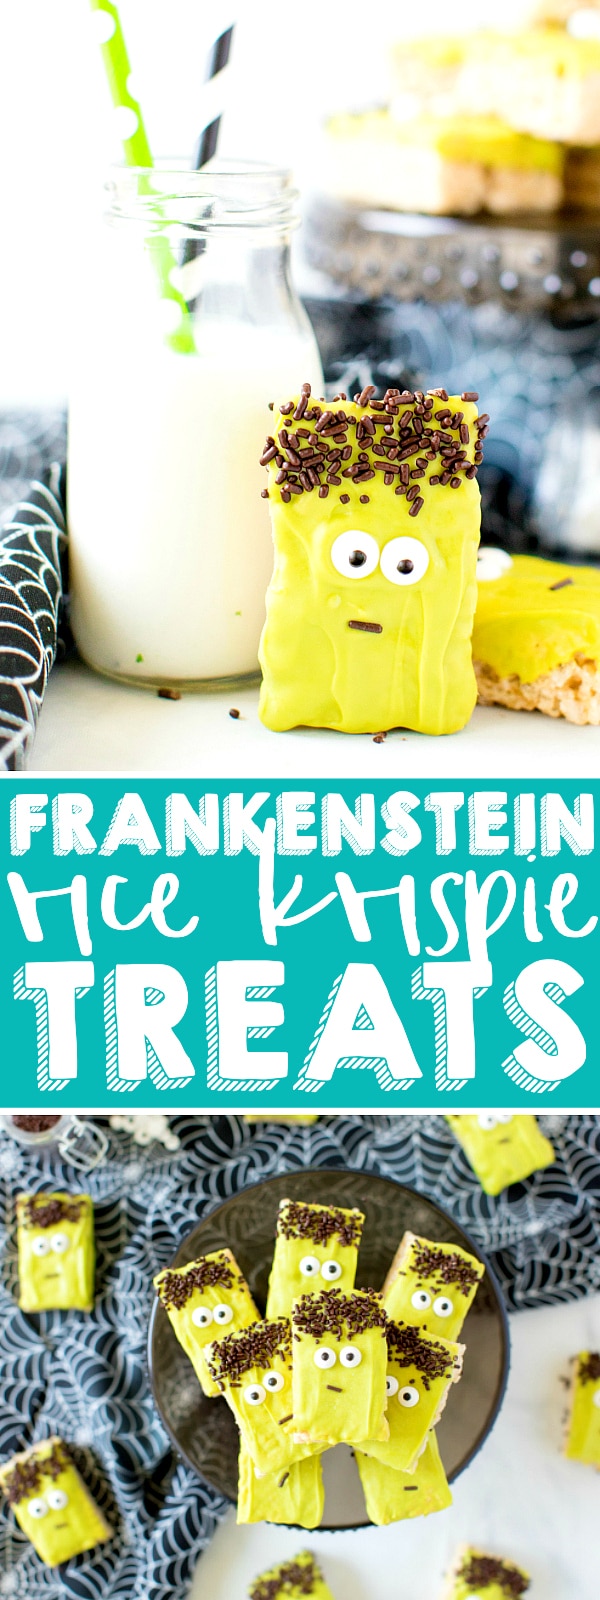 Adorable Frankenstein Rice Krispie Treats that everyone will love at your Halloween party! A fun Halloween treat that's easy to make, even for tiny helpers! Can use homemade rice krispie treats or store bought for even faster prep! | The Love Nerds #halloweendessert 